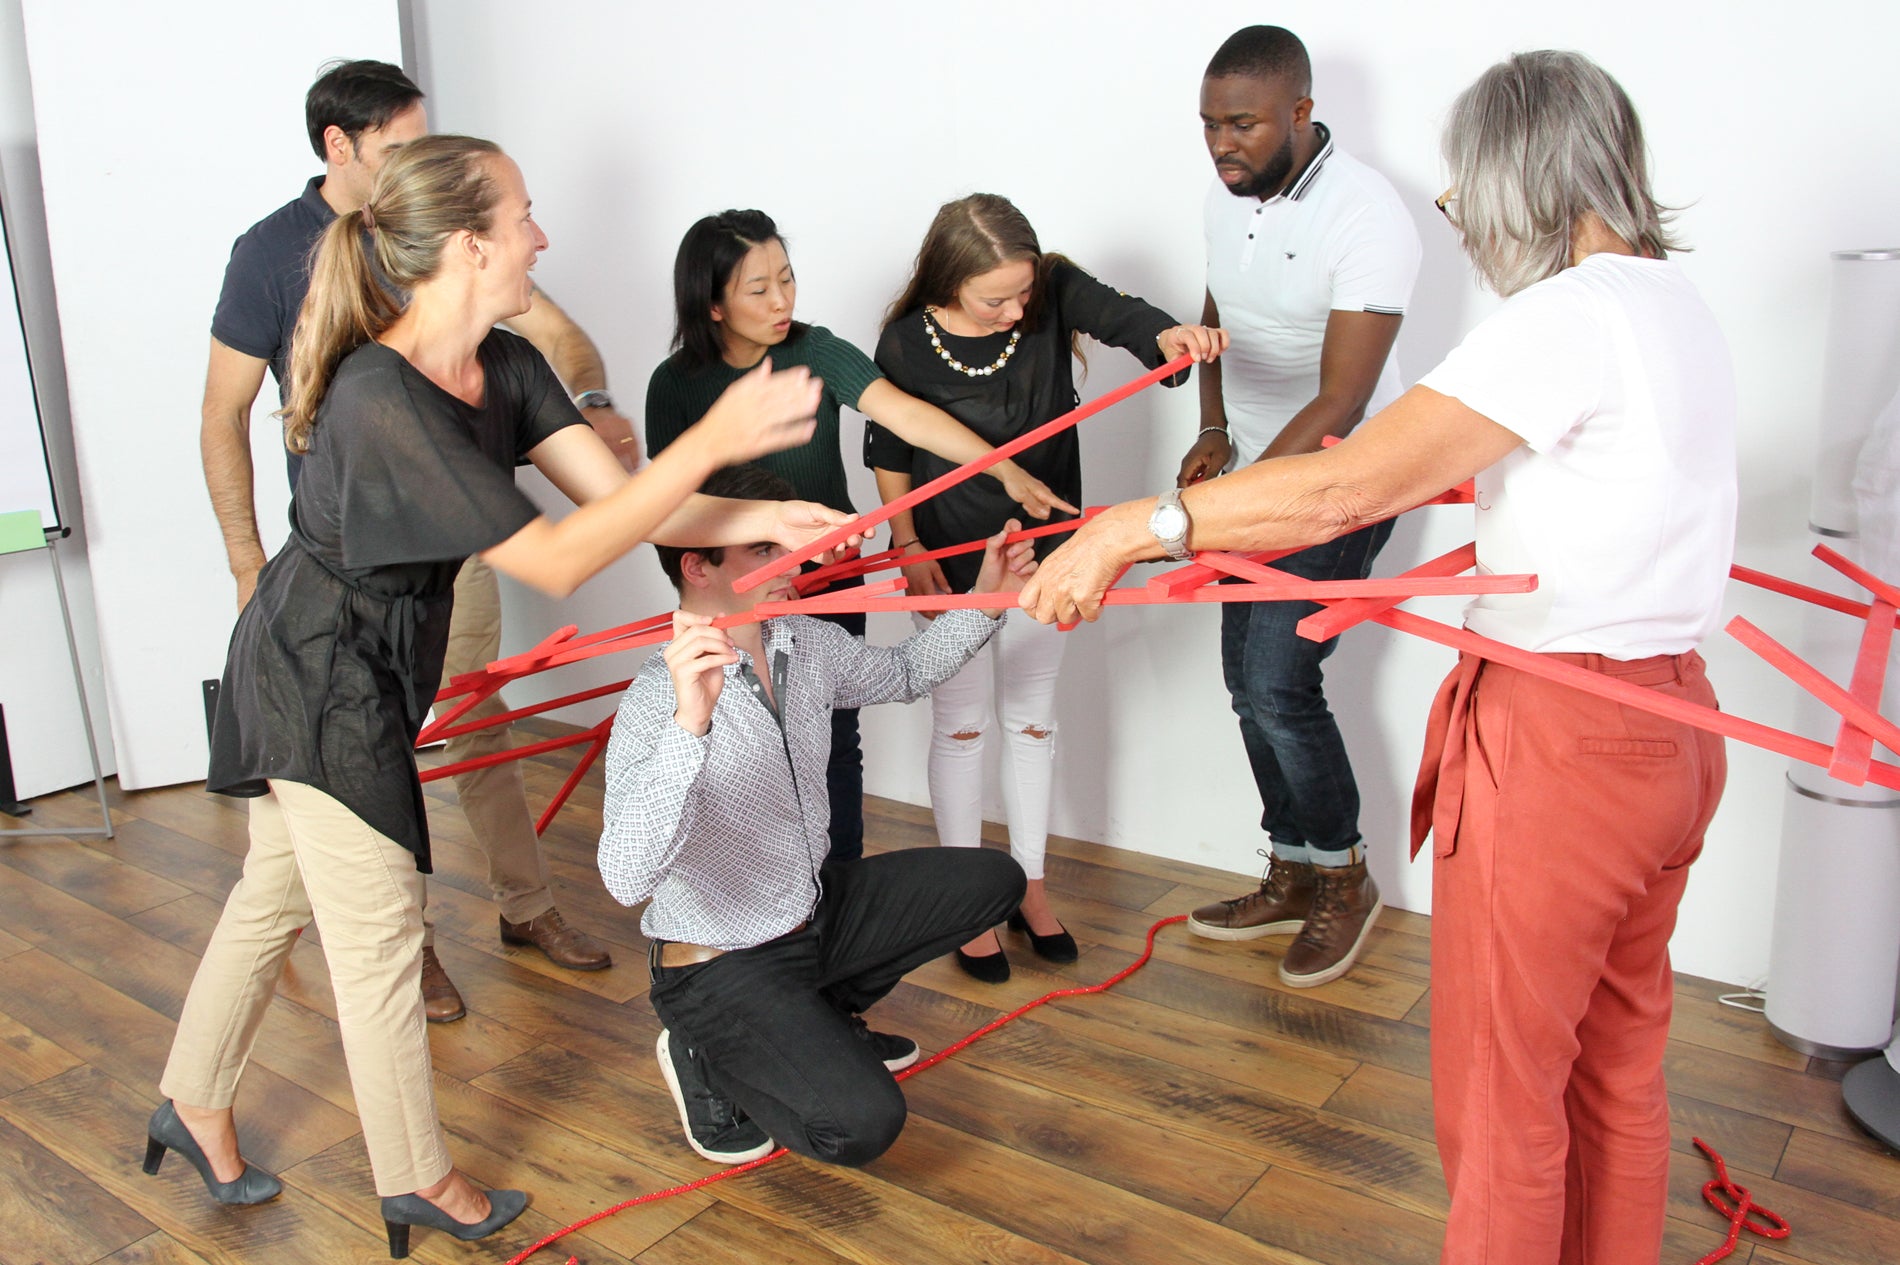 Adults use Leanardo's Bridge to practice working together to overcome obstacles and bridge divides.